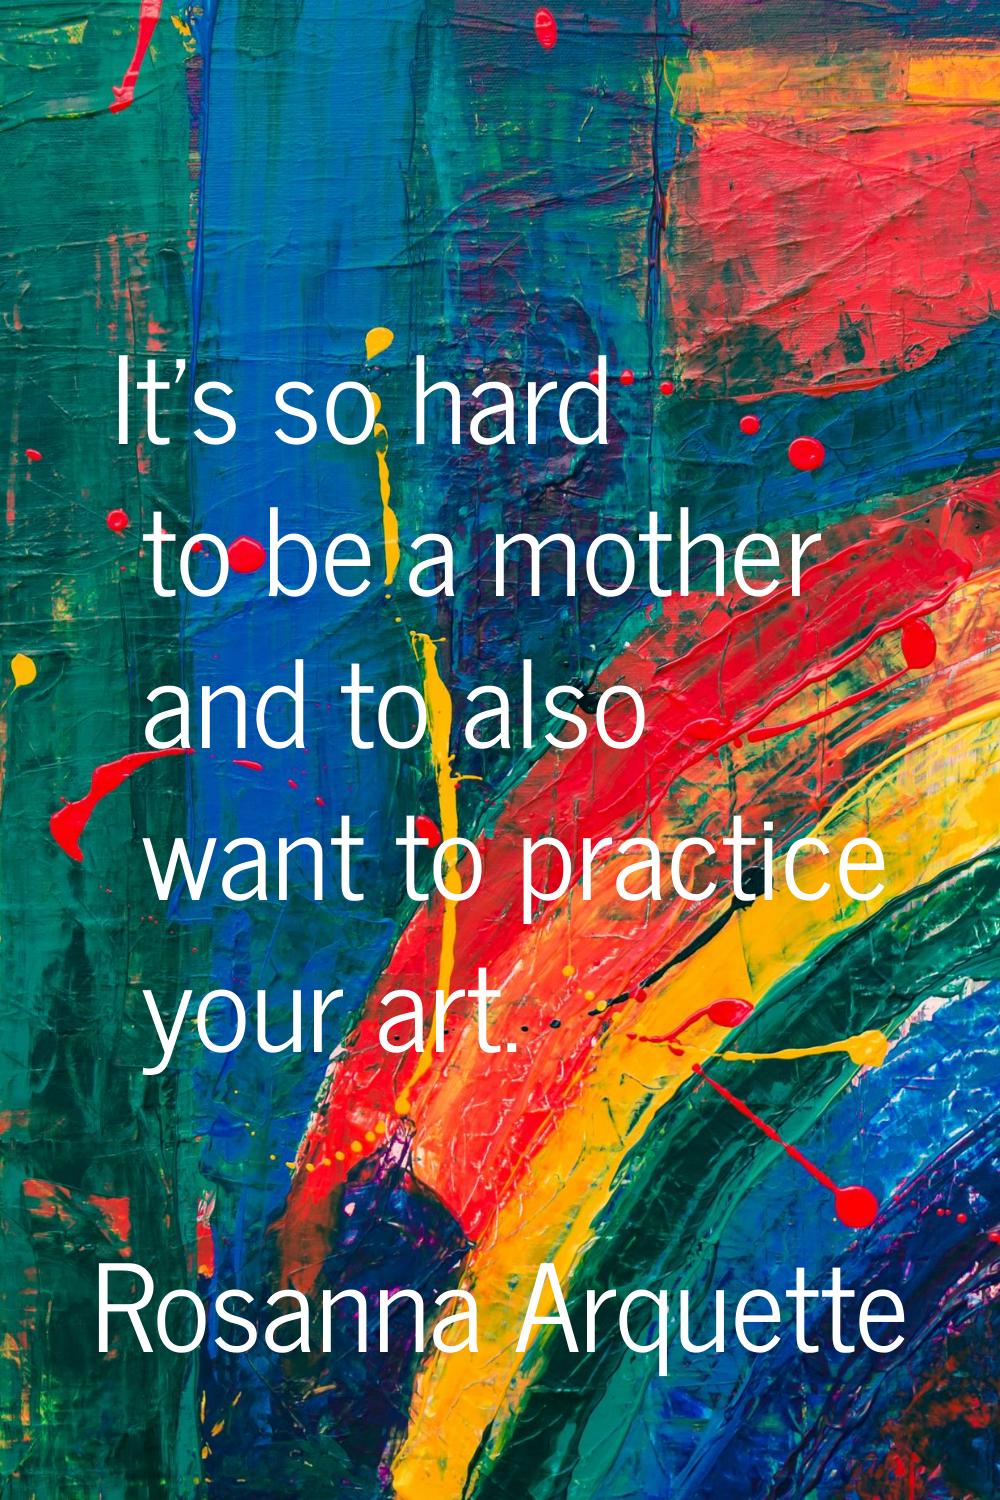 It's so hard to be a mother and to also want to practice your art.